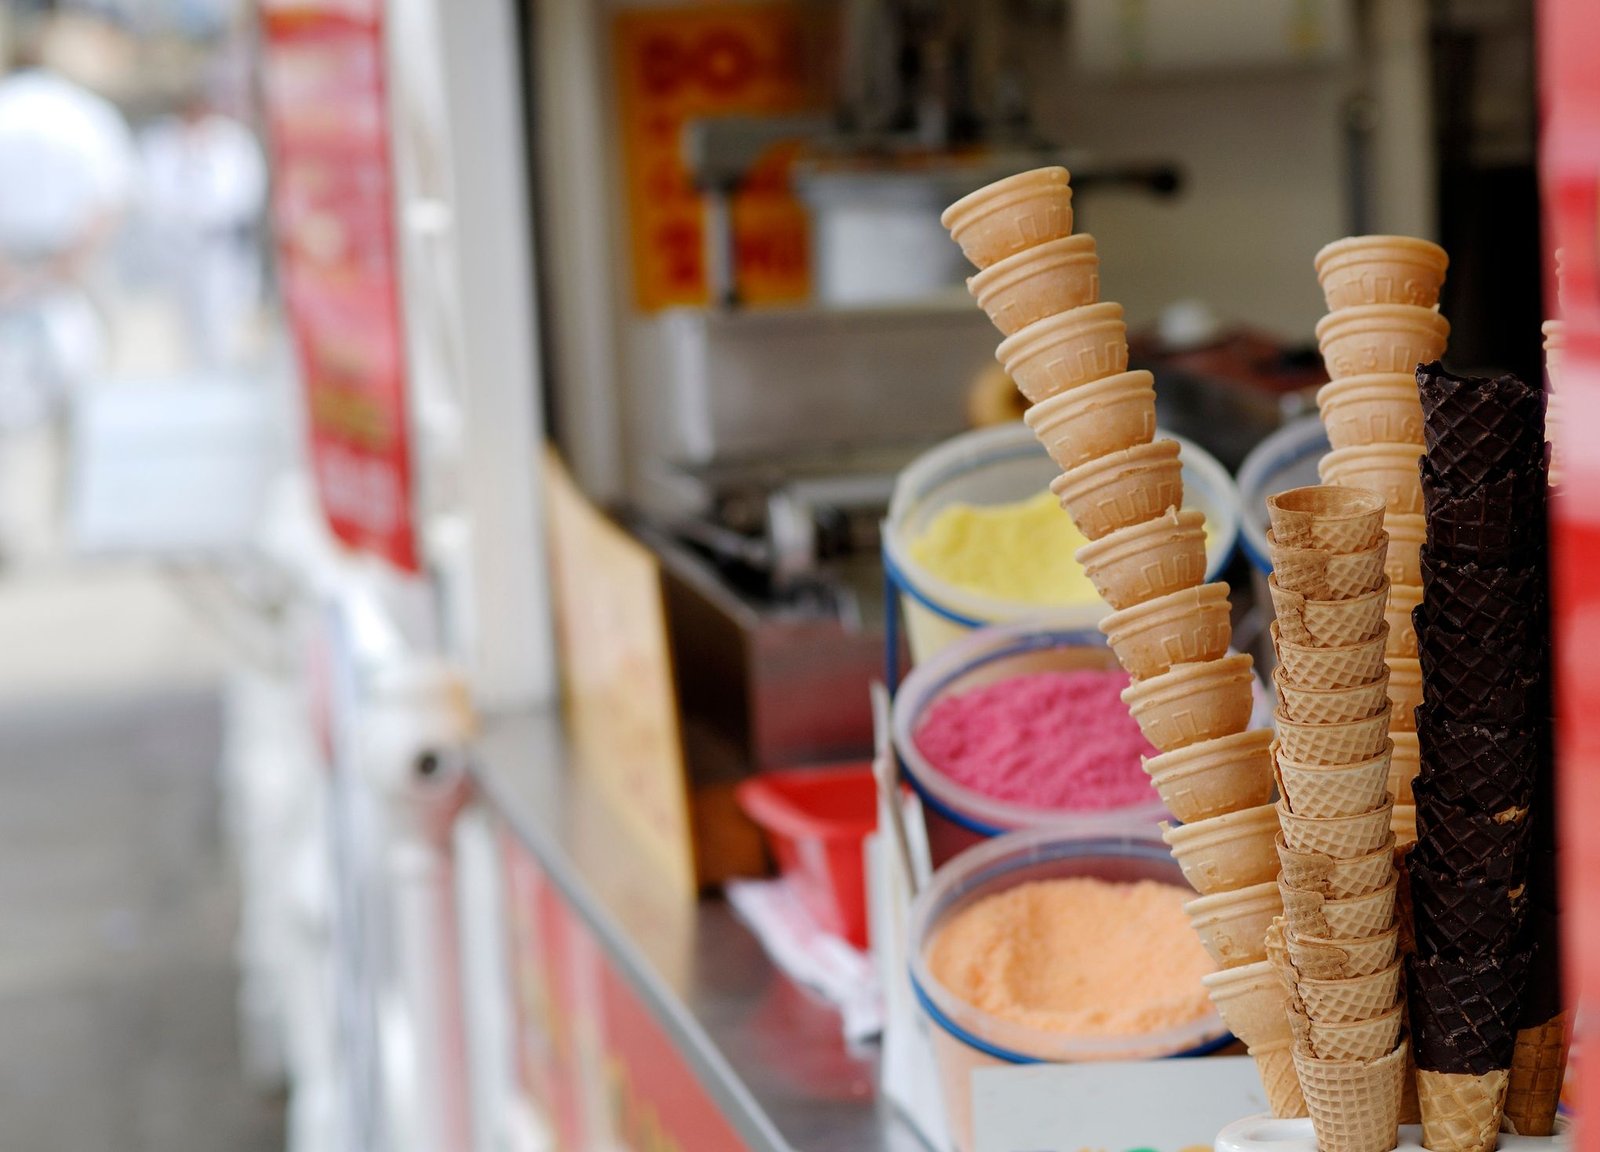 The ice cream cone was invented at the St. Louis World's Fair in 1904.